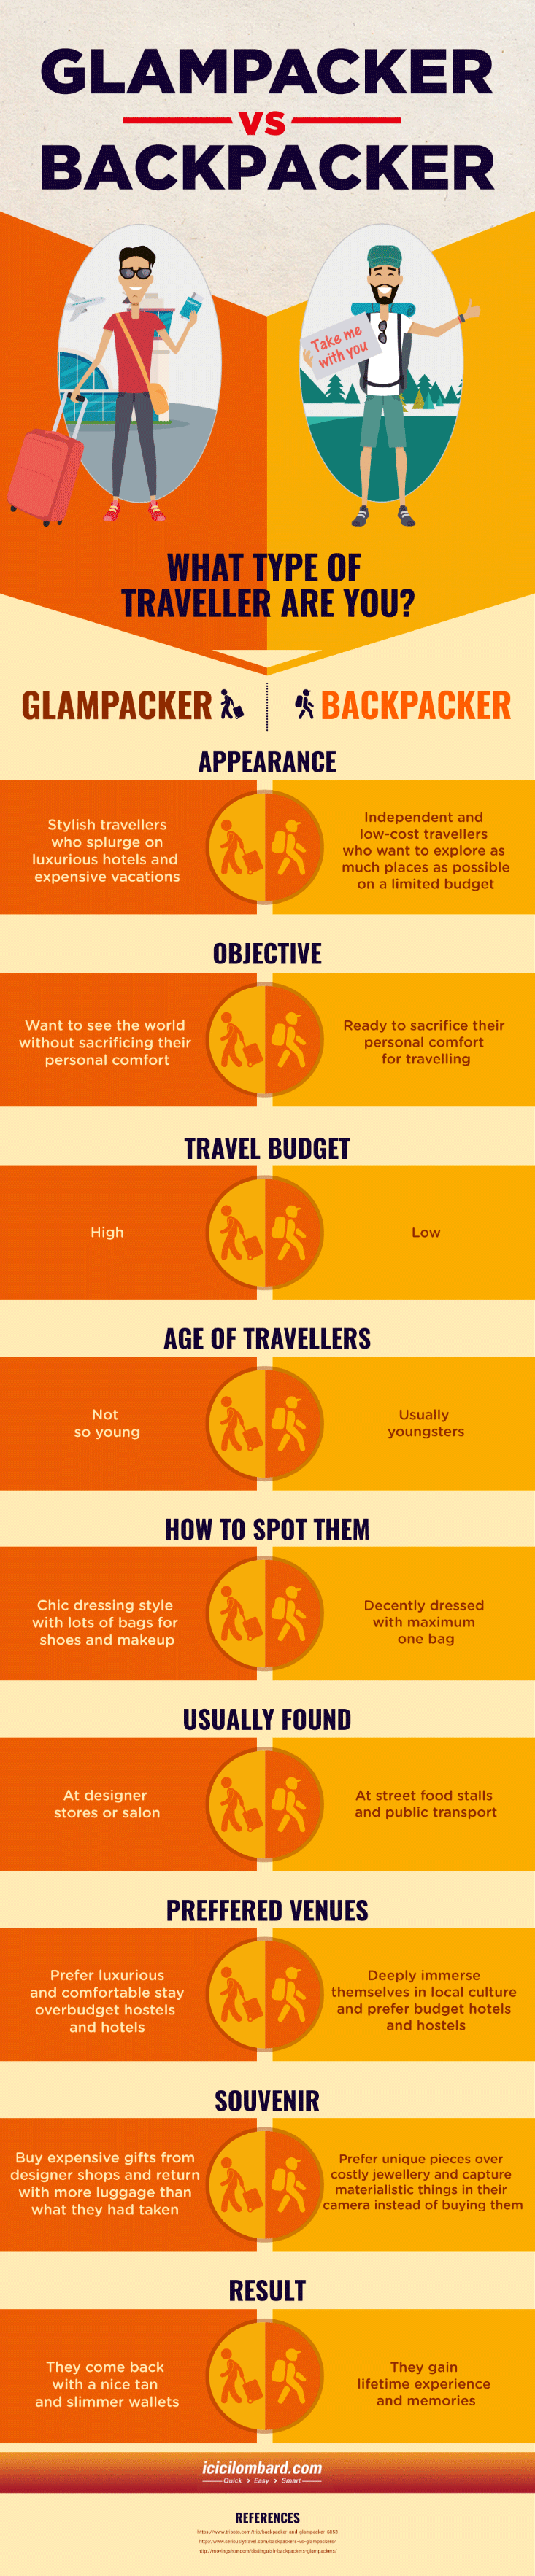 Glampacker or Backpacker - What type of traveller are you?